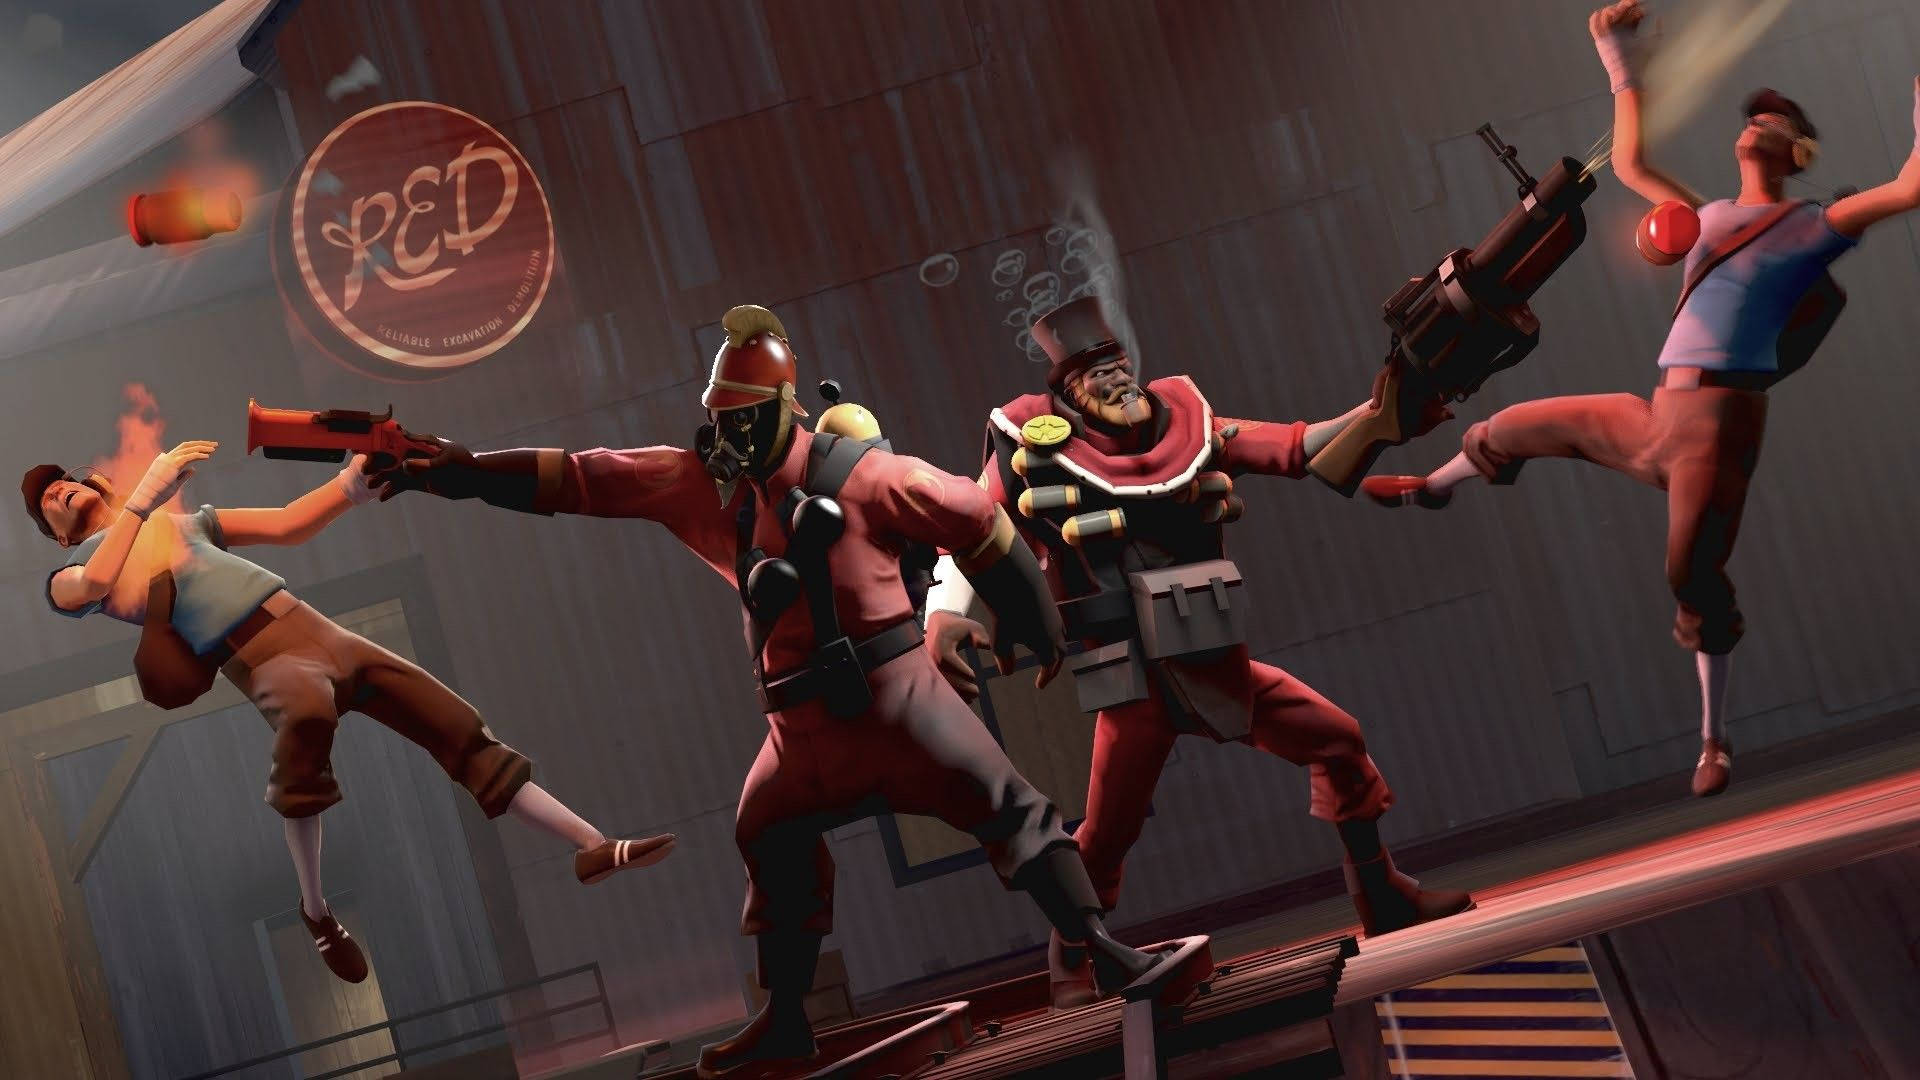 Stunning Action Shot Of Demoman And Pyro From Team Fortress 2